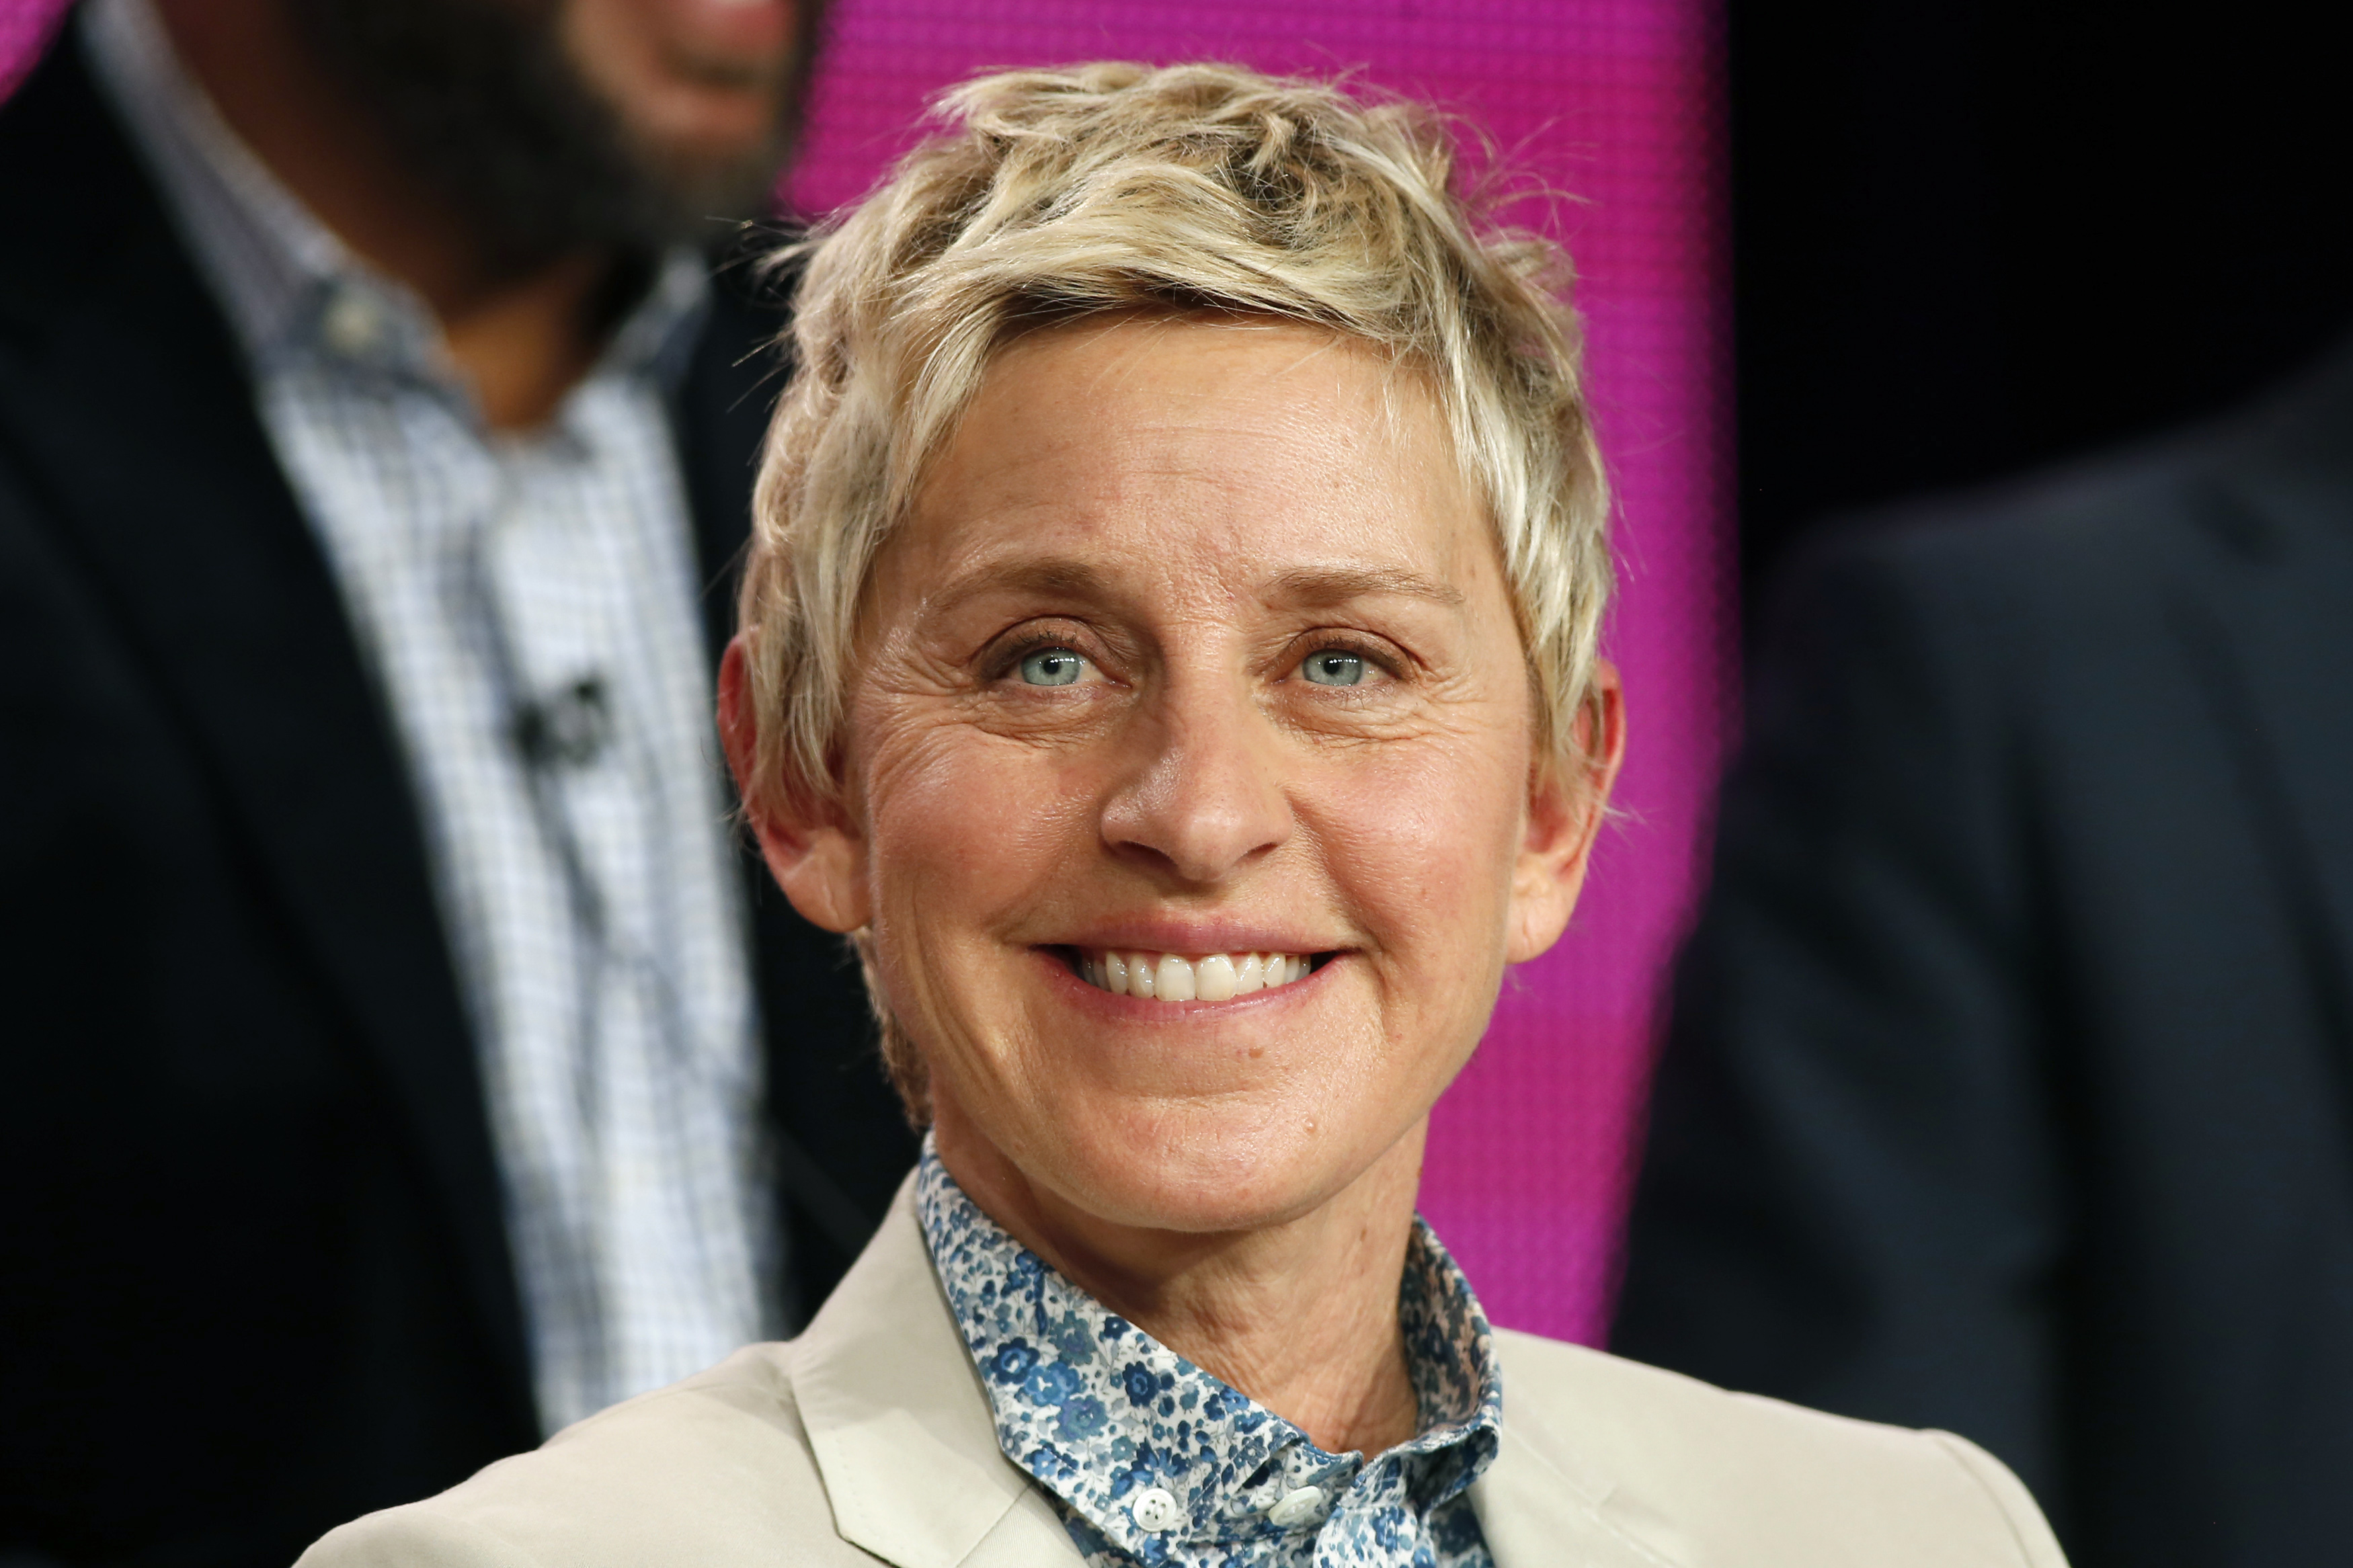 Executive Producer Ellen DeGeneres speaks about the NBC television show "One Big Happy" during the TCA presentations in Pasadena, California, January 16, 2015 (Lucy Nicholson—Reuters)